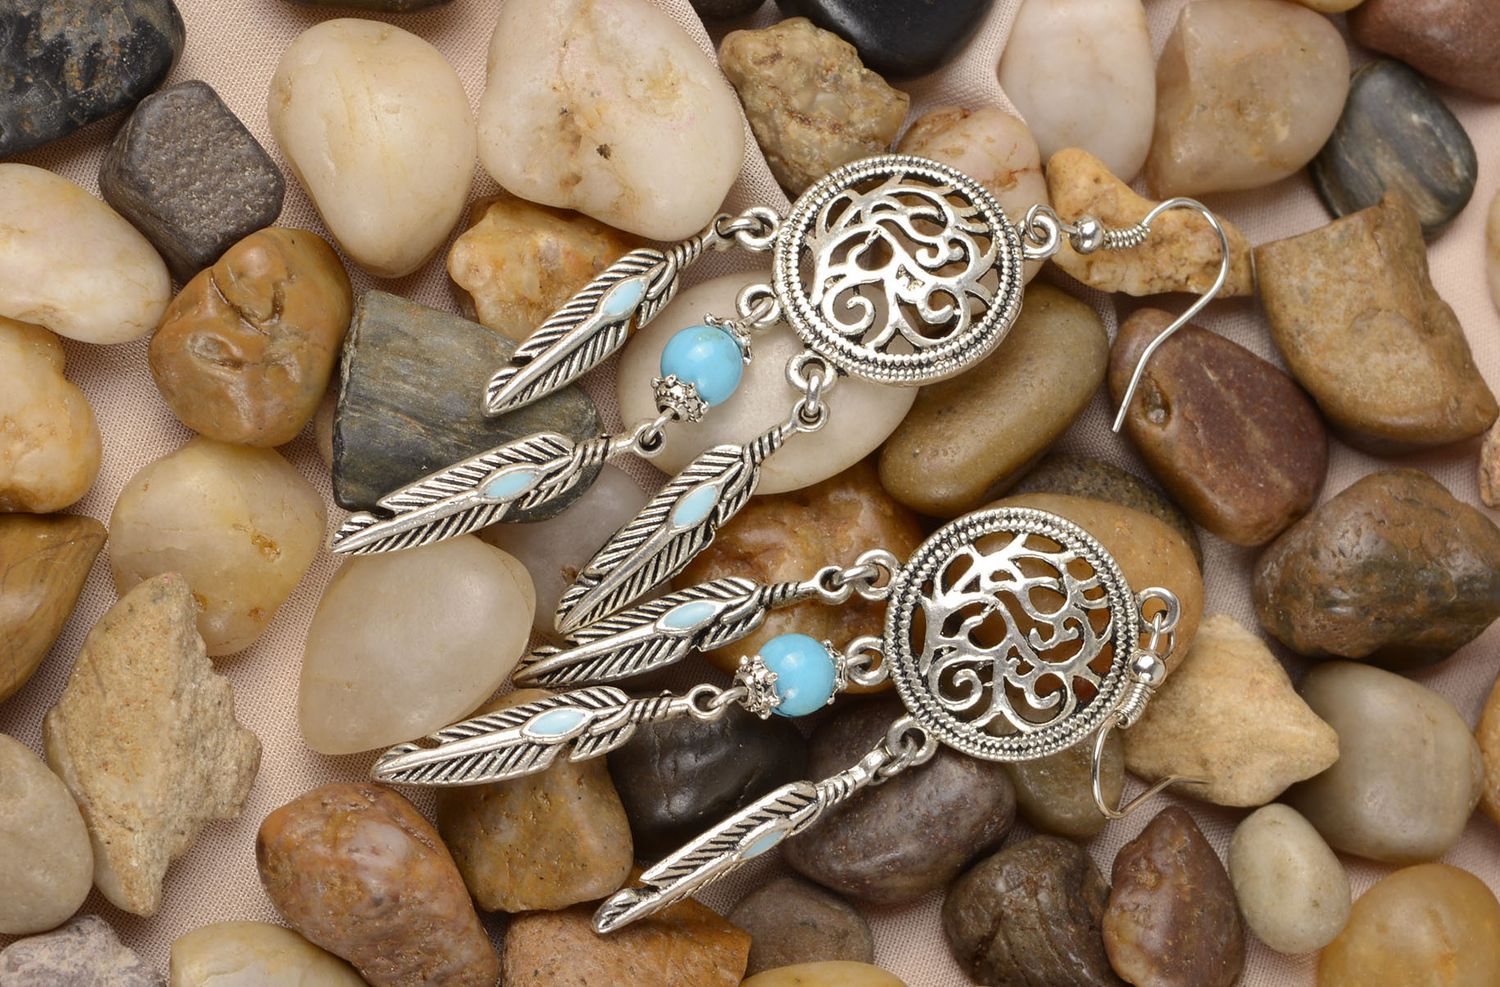 Metal earrings handmade long earrings with charms metal jewelry gift for her photo 1